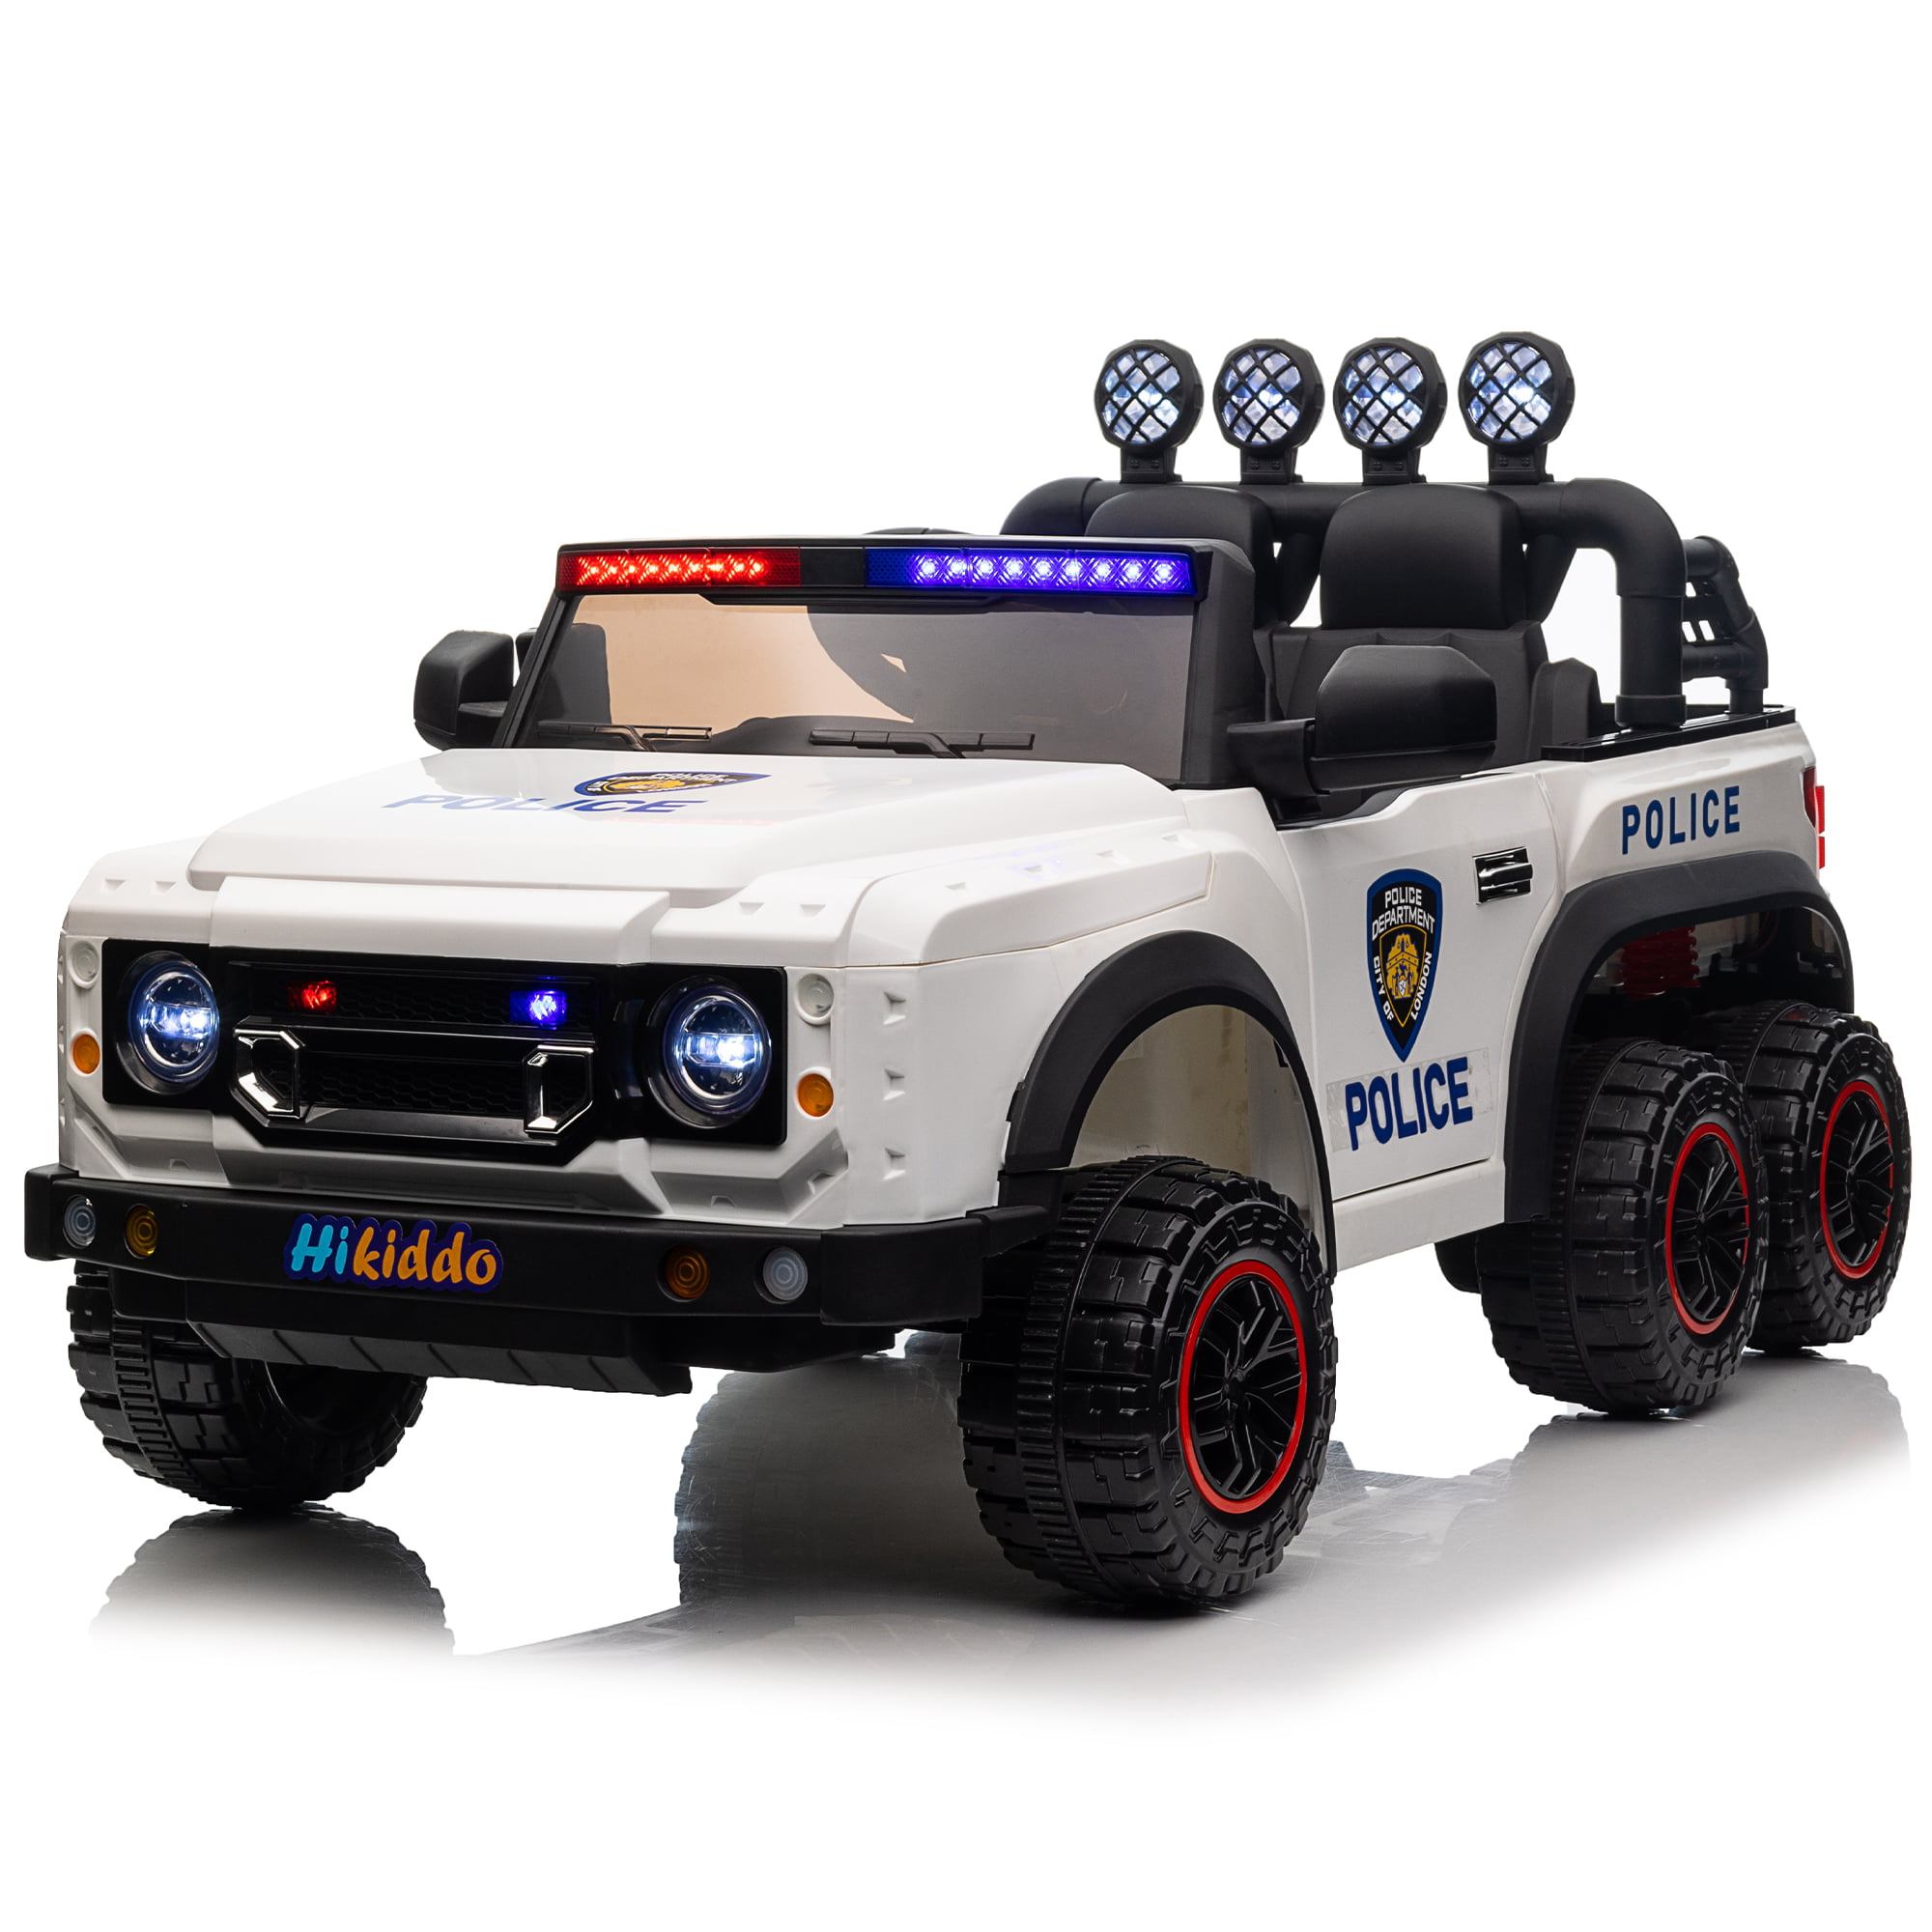 Hikiddo JC003 24V Kids Ride on Police Car, 2 Seater Powered Ride on Toy Truck with Remote, Megaphone